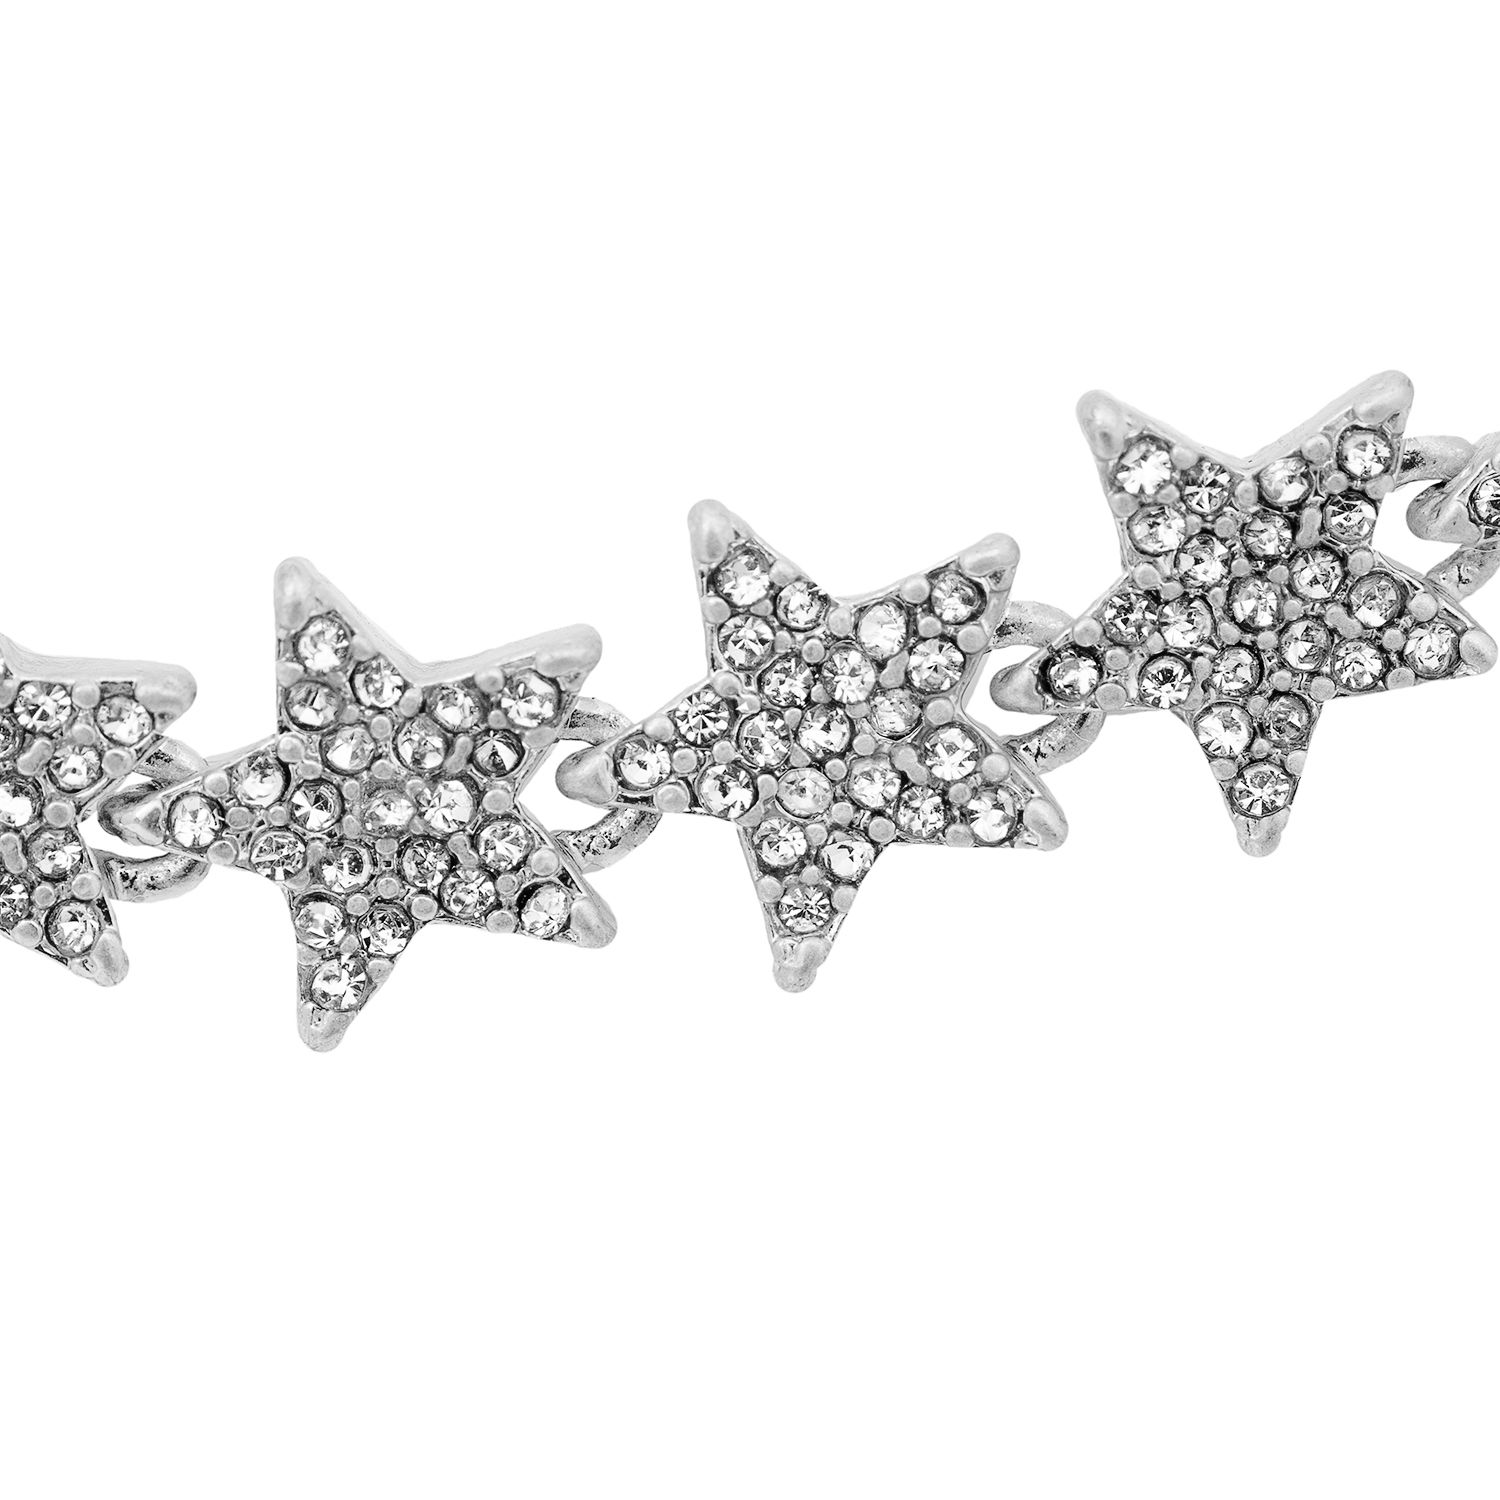 The Kate Thorton Sparkling Stars bracelet looks stunning with a day time chunky knit look on its own, and you can really bring the glamour by teaming it up with the matching necklace and earrings too. The tennis style bracelet is silver plated and adorned with pave clear stones across every star, and it comes with an extender too. A classic look with a cool twist, fans of sparkle and celestial jewellery will love this piece!